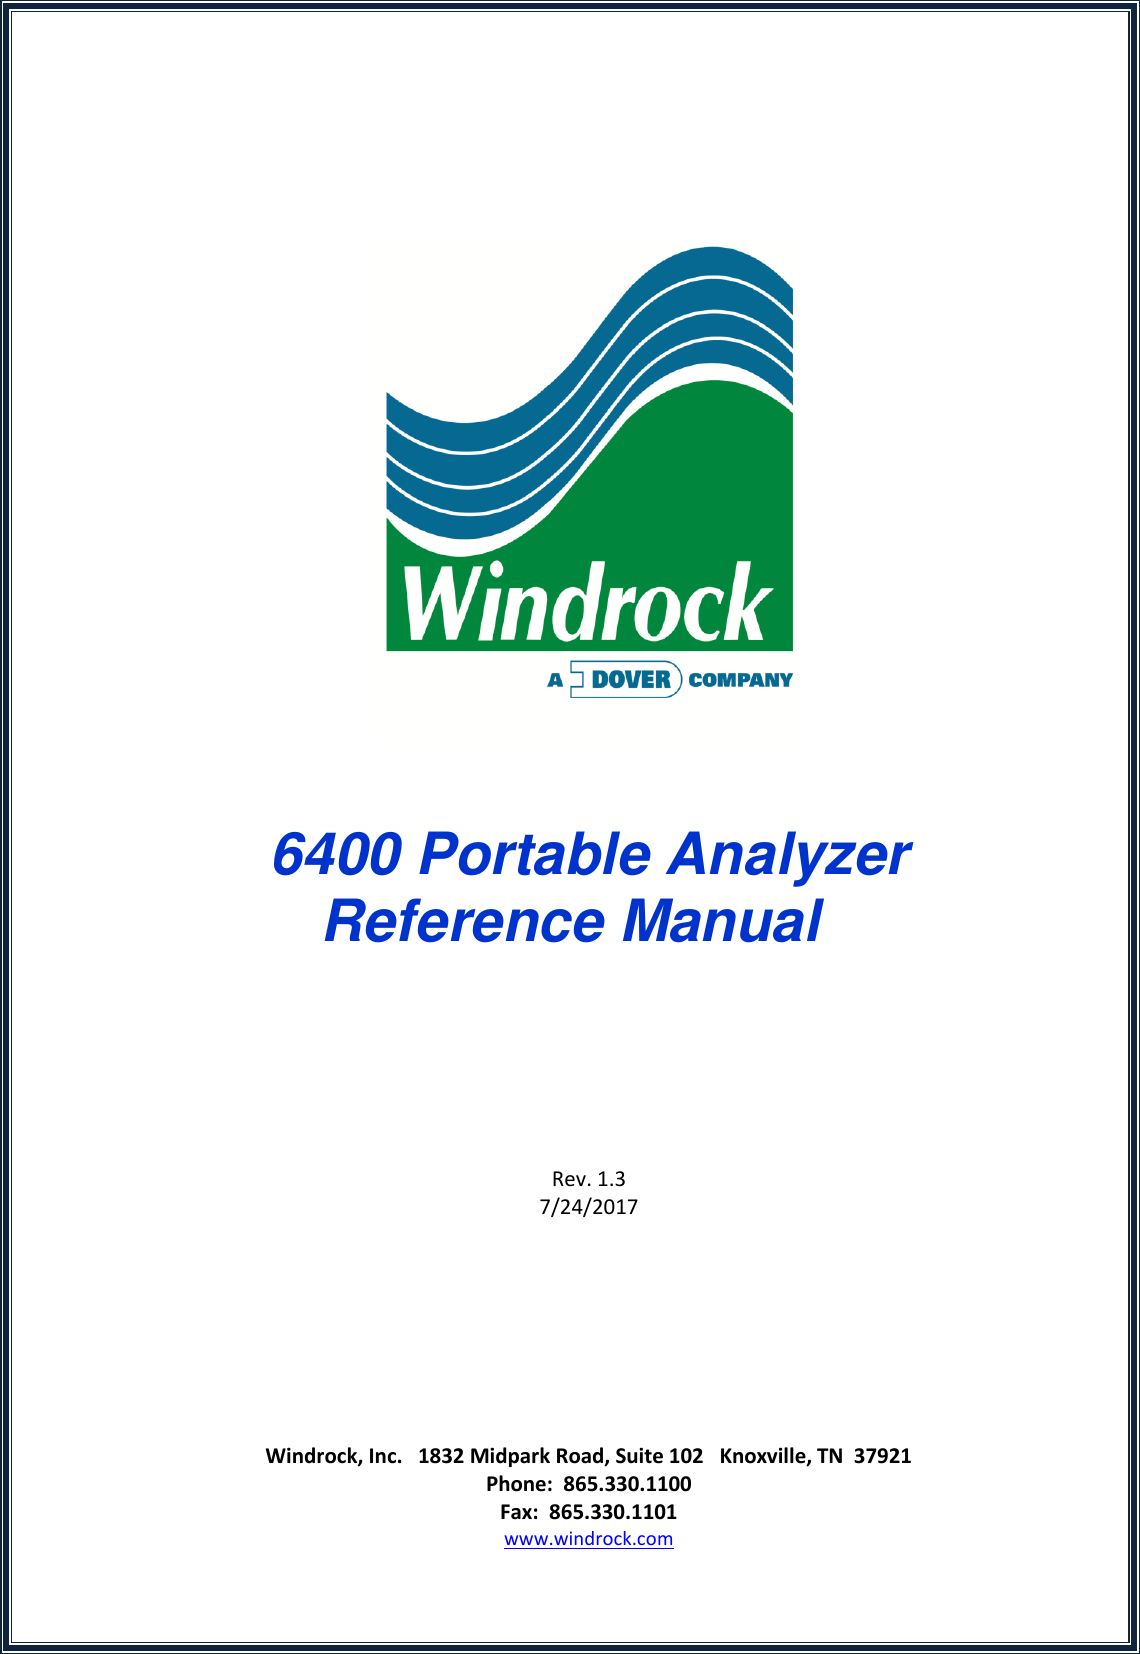        6400 Portable Analyzer  Reference Manual       Rev. 1.3 7/24/2017         Windrock, Inc.   1832 Midpark Road, Suite 102   Knoxville, TN  37921 Phone:  865.330.1100 Fax:  865.330.1101 www.windrock.com 